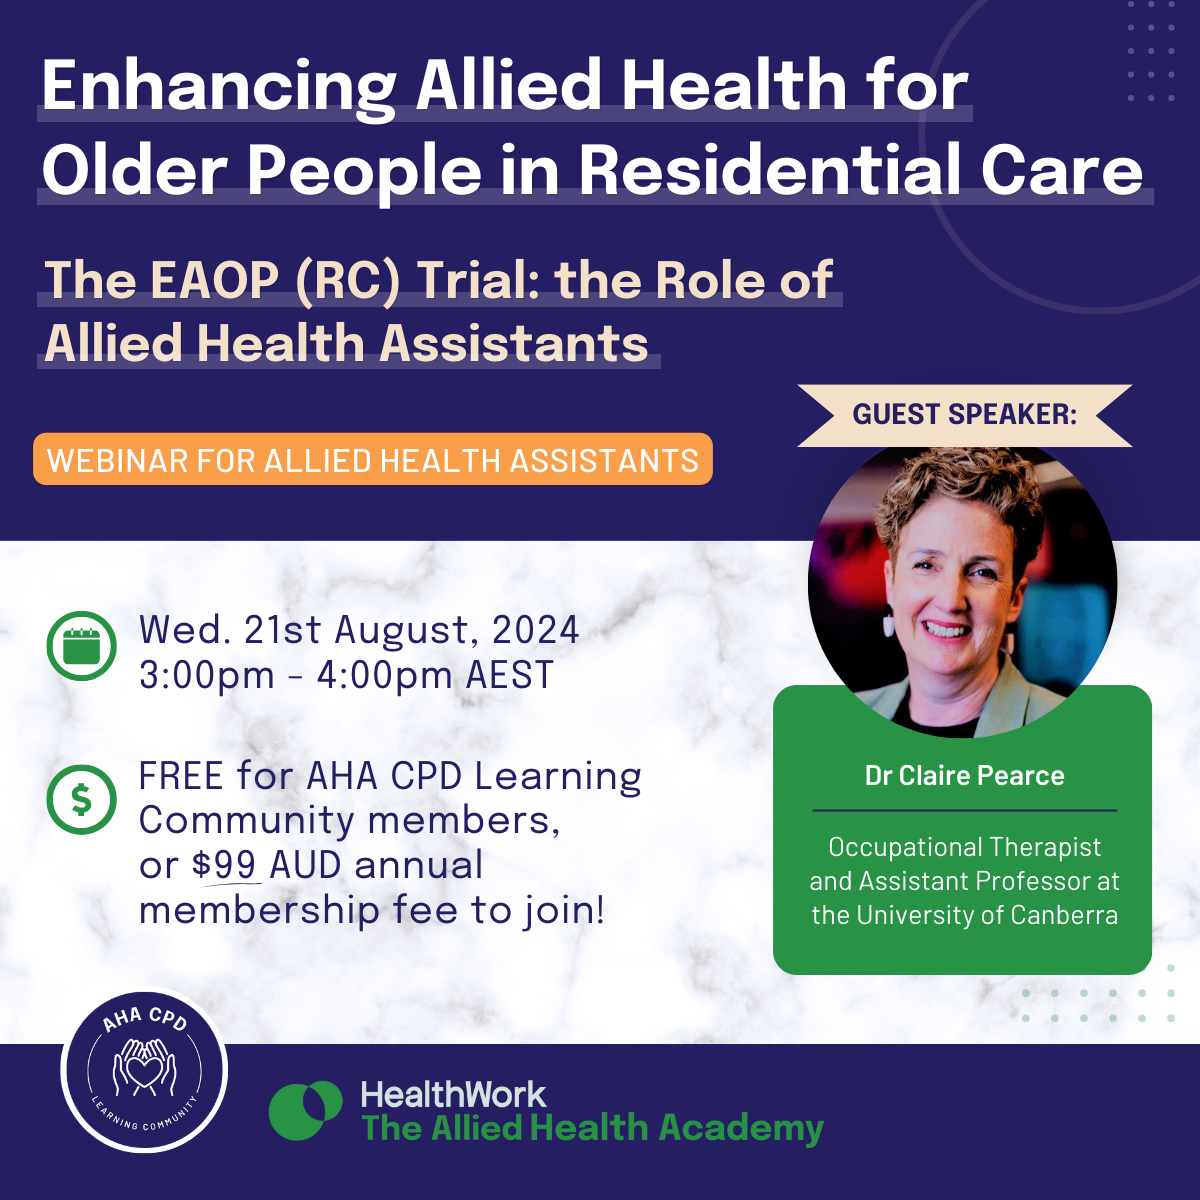 Enhancing Allied Health for Older People in Residential Care - The Role of Allied Health Assistants